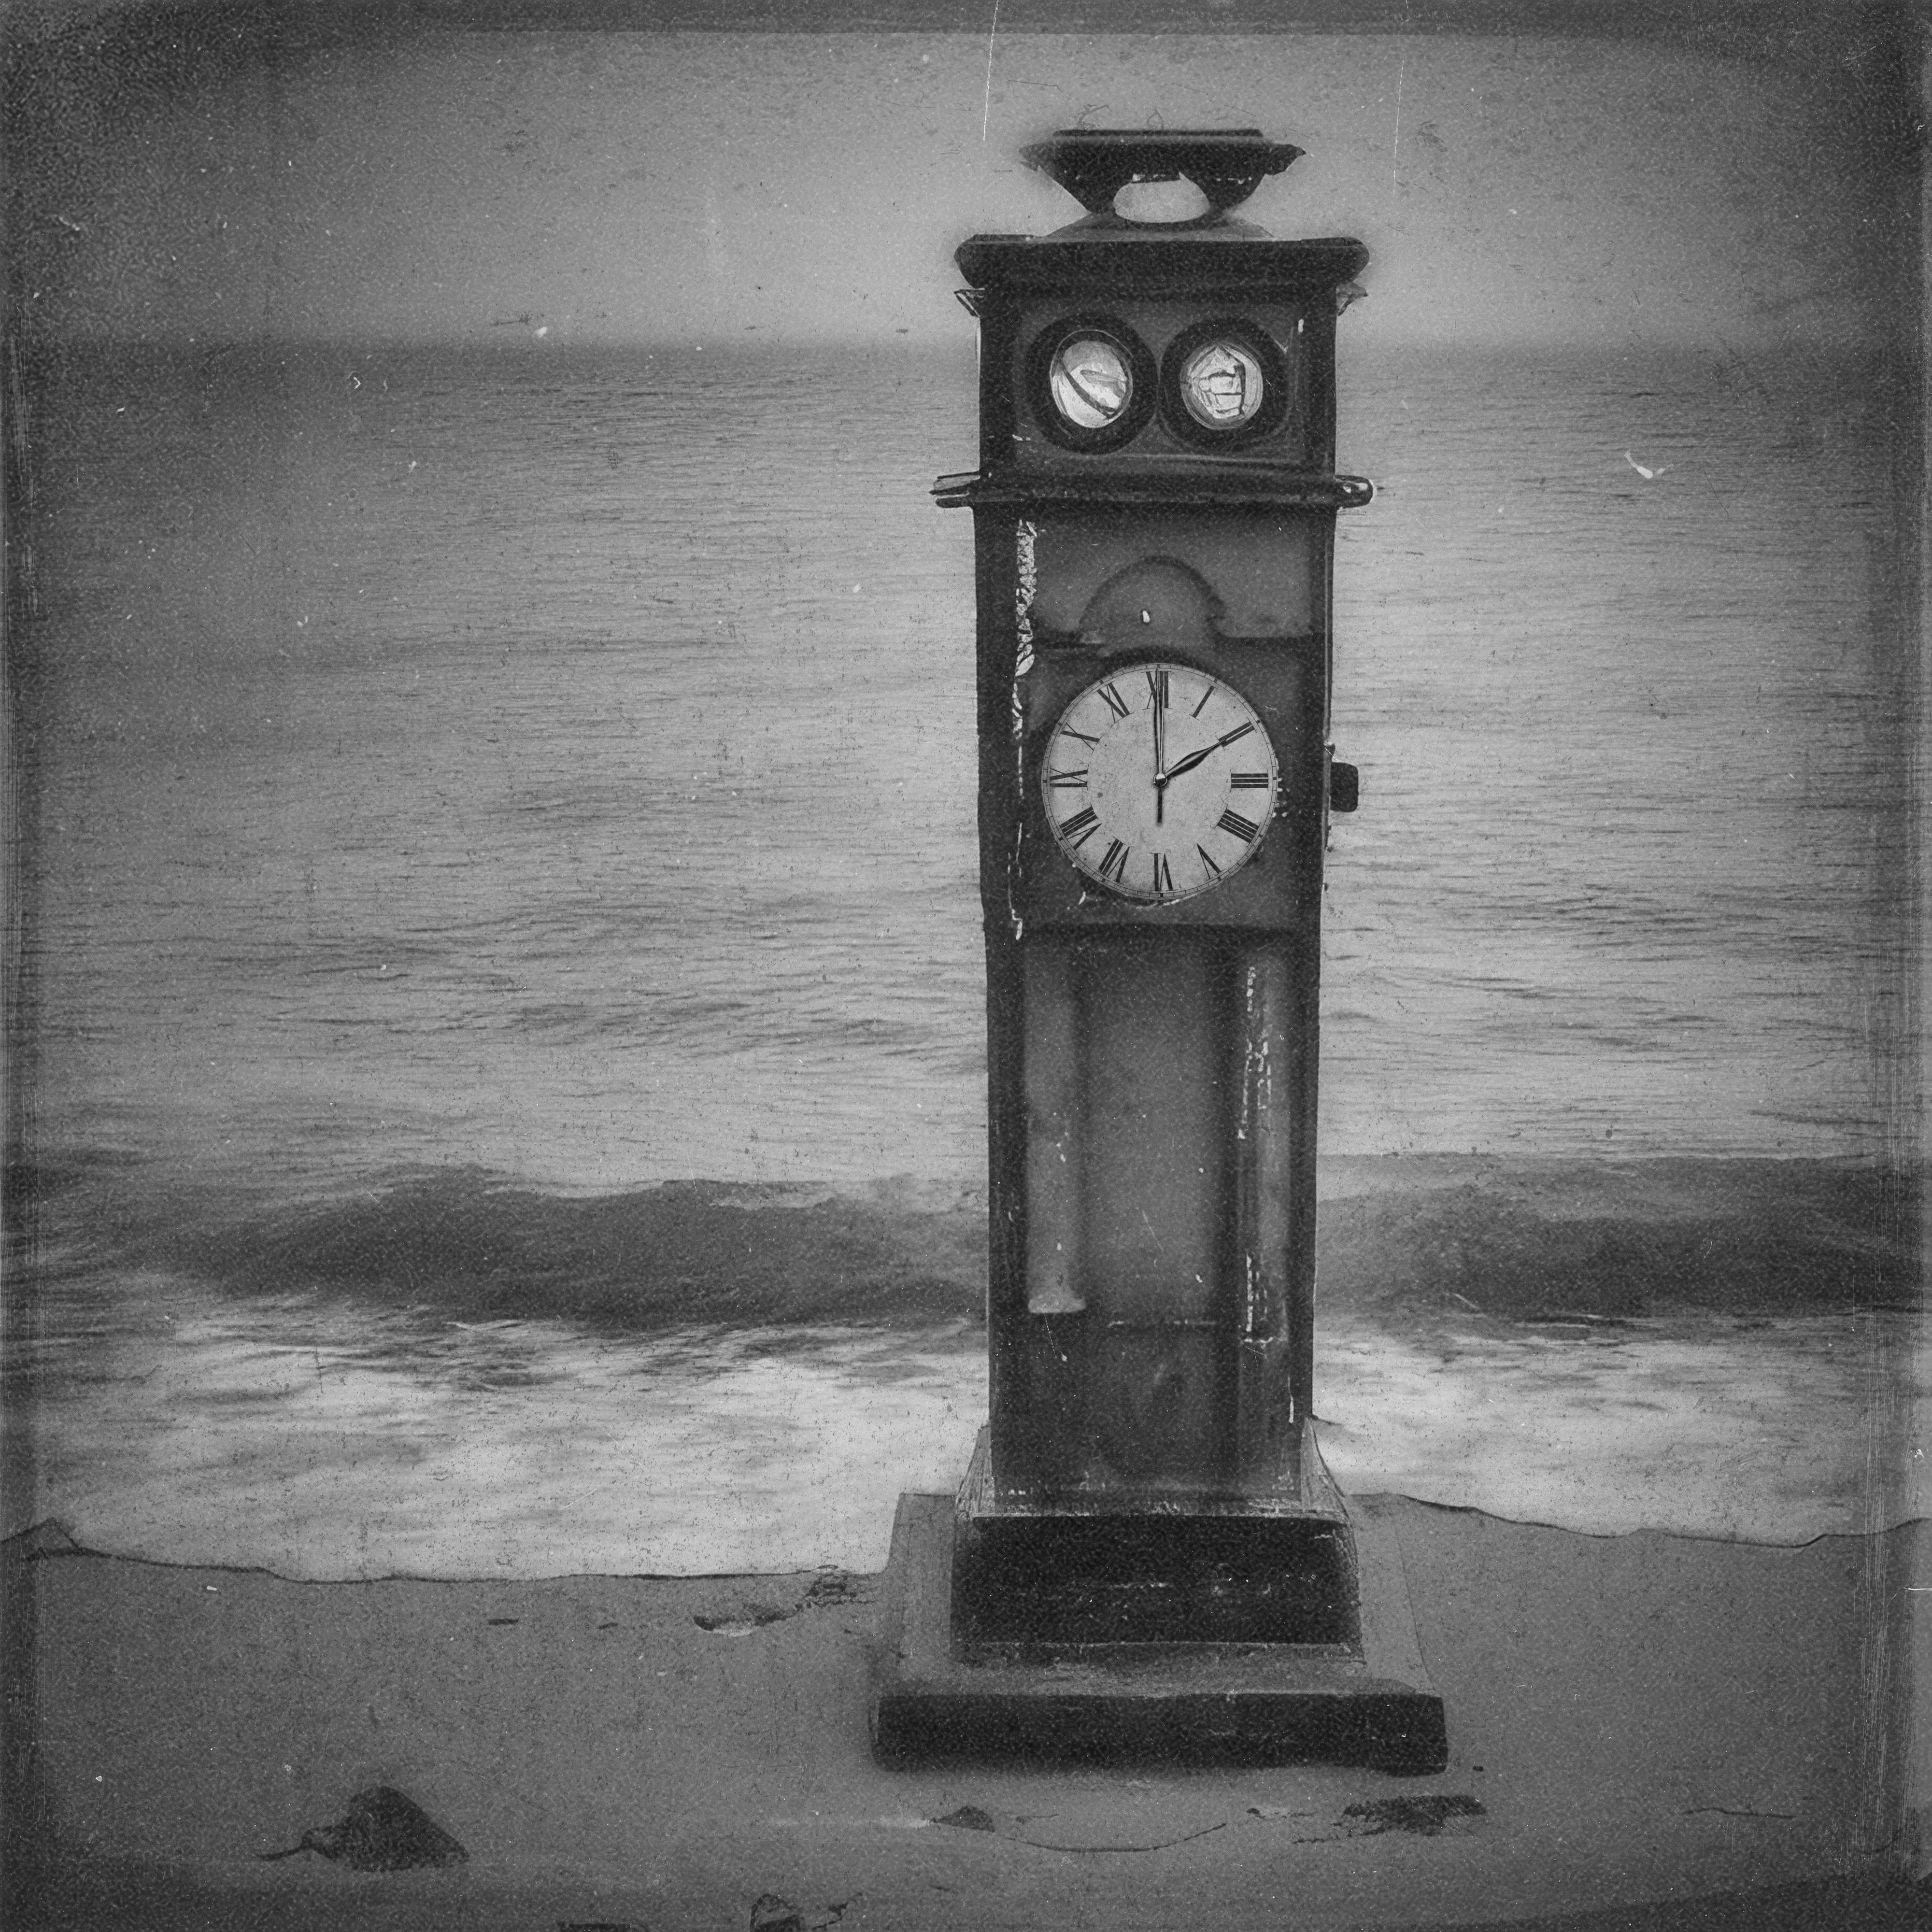 Clock by the sea by Adrian Lane